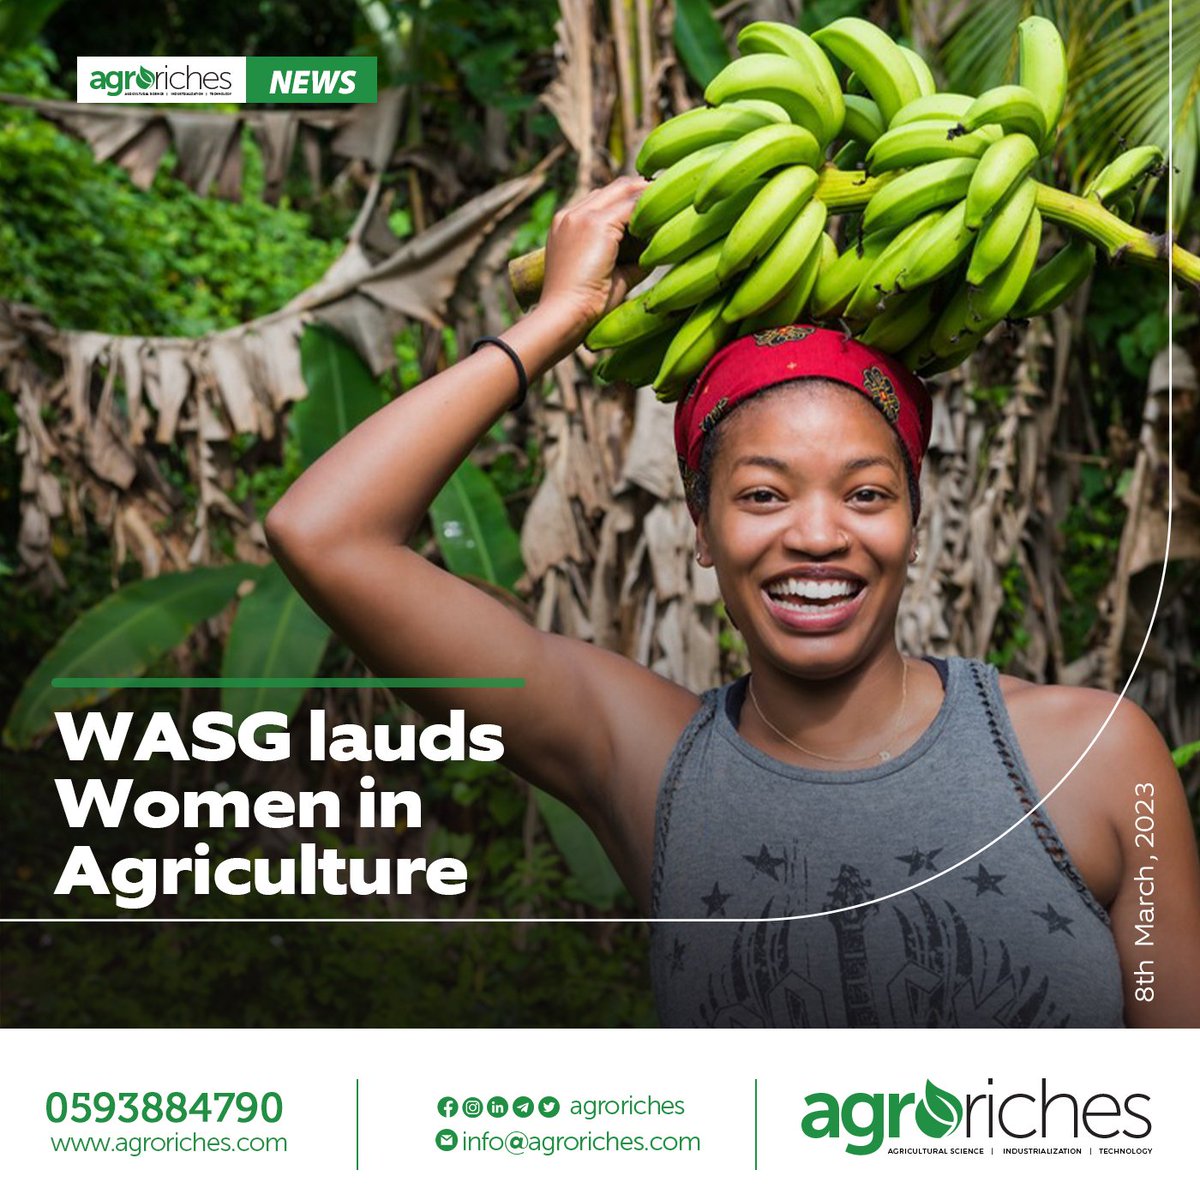 WASG laud women in agriculture.

visit our website agroriches.com to read more

#africa #market #industry #solution #agriculture
#agroriches #ghana #farm #world. #africa
#technology #projects  #largest #womeninagriculture